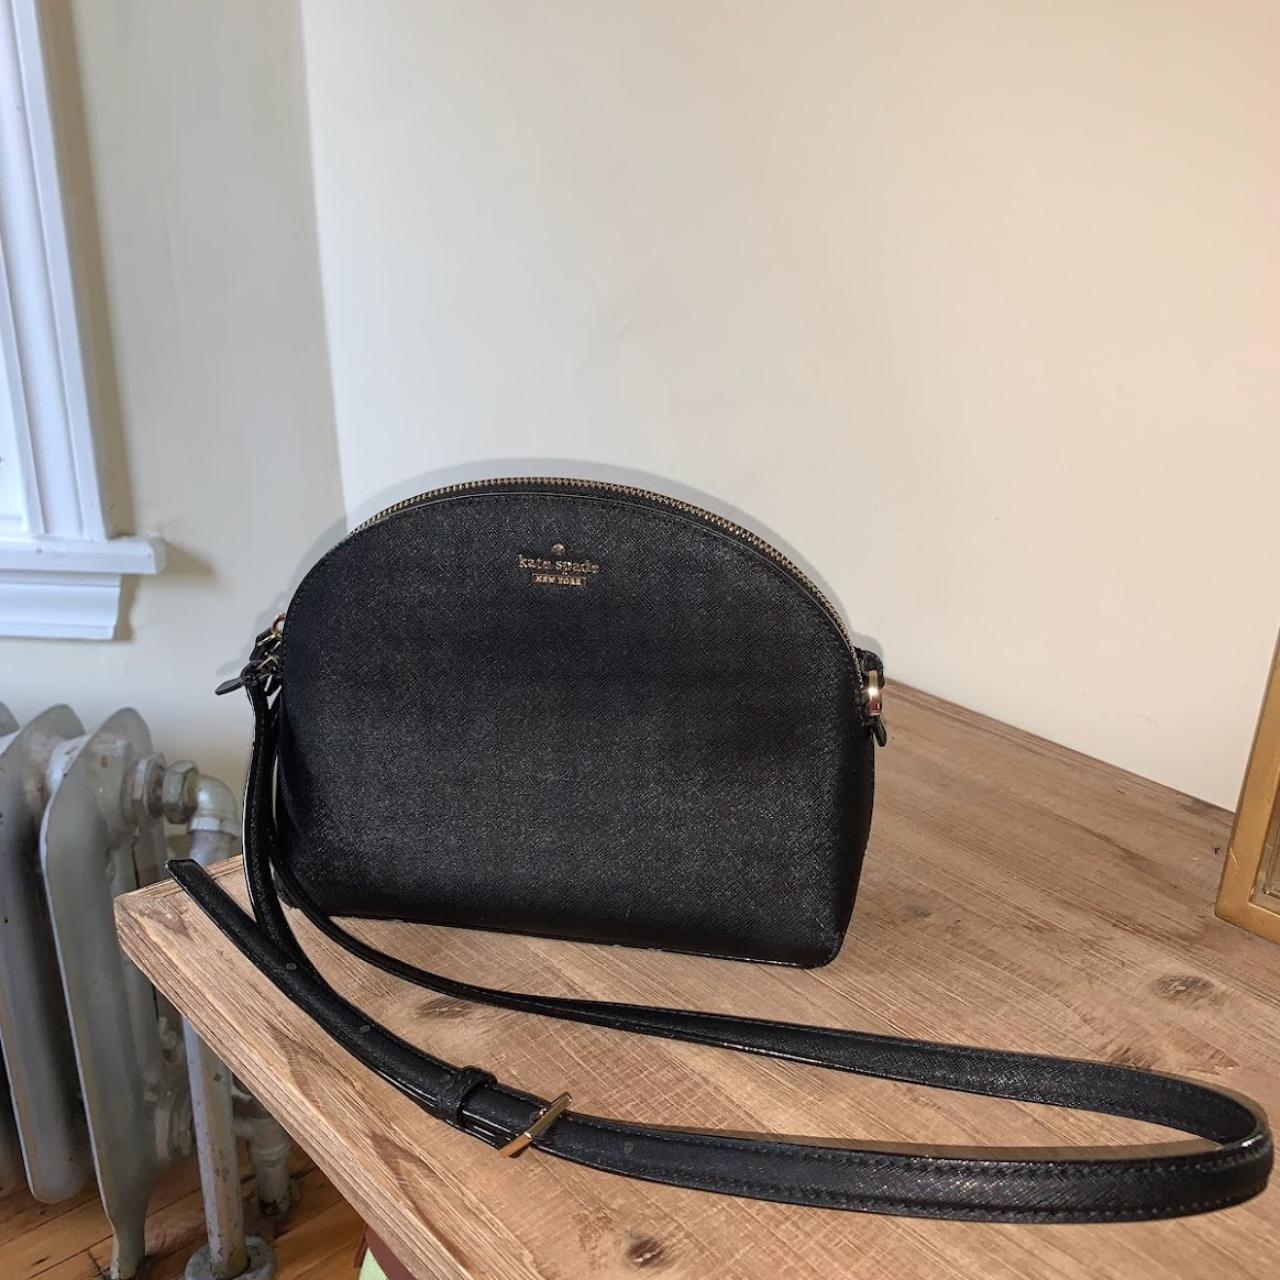 Kate spade purse Never used it, don't have the tags - Depop